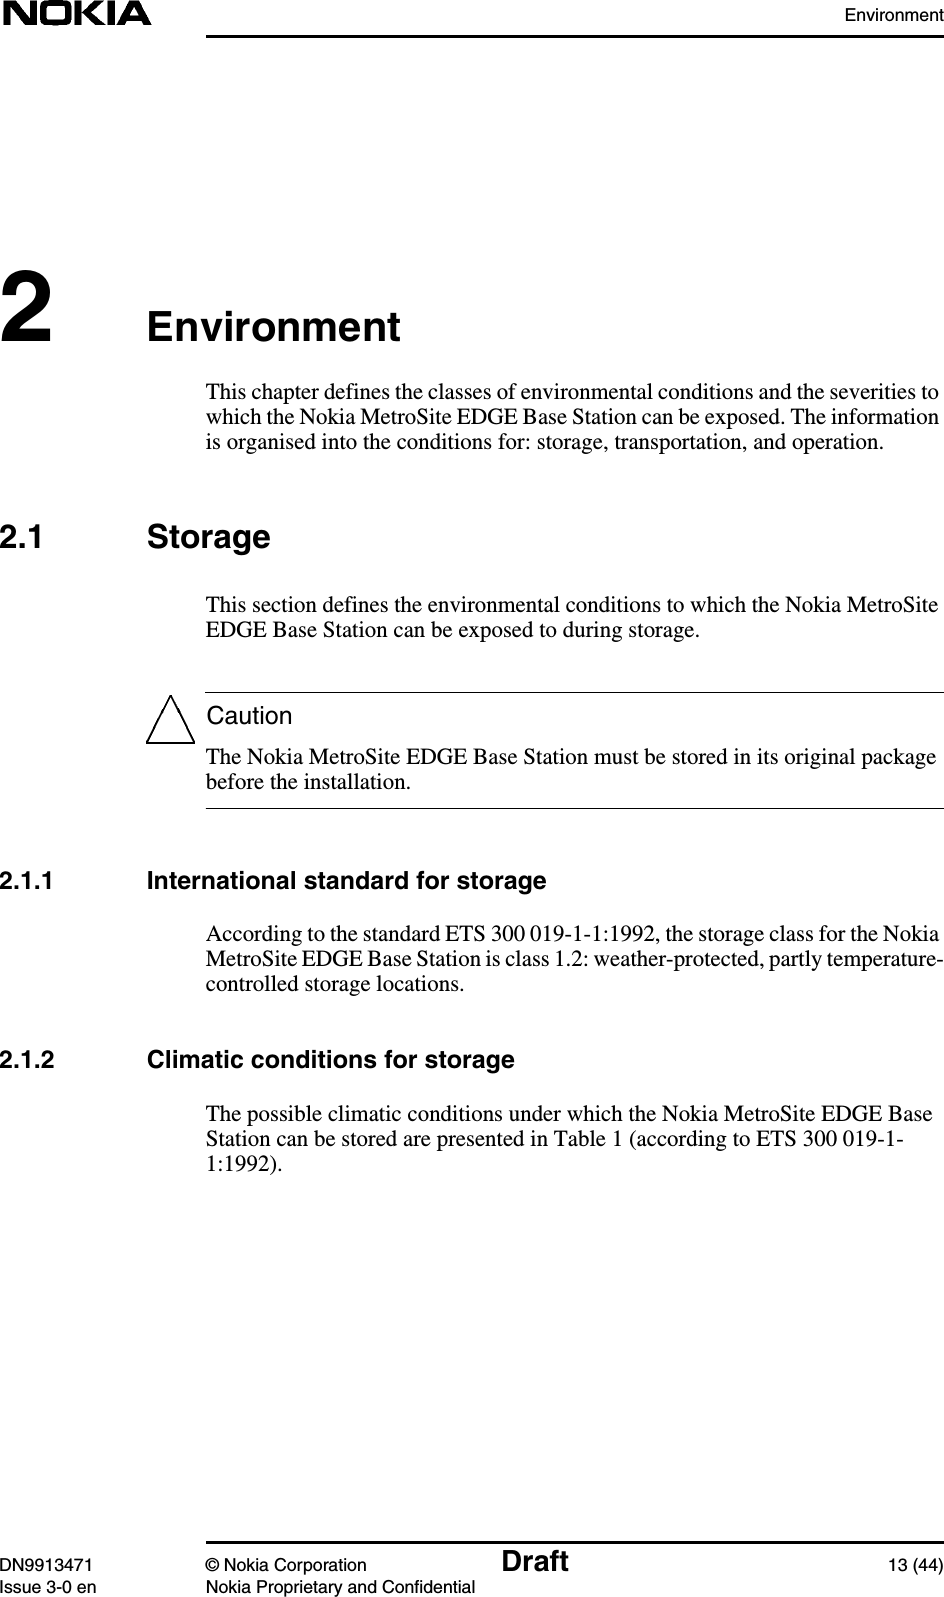 EnvironmentDN9913471 © Nokia Corporation Draft 13 (44)Issue 3-0 en Nokia Proprietary and ConfidentialCaution2EnvironmentThis chapter defines the classes of environmental conditions and the severities towhich the Nokia MetroSite EDGE Base Station can be exposed. The informationis organised into the conditions for: storage, transportation, and operation.2.1 StorageThis section defines the environmental conditions to which the Nokia MetroSiteEDGE Base Station can be exposed to during storage.The Nokia MetroSite EDGE Base Station must be stored in its original packagebefore the installation.2.1.1 International standard for storageAccording to the standard ETS 300 019-1-1:1992, the storage class for the NokiaMetroSite EDGE Base Station is class 1.2: weather-protected, partly temperature-controlled storage locations.2.1.2 Climatic conditions for storageThe possible climatic conditions under which the Nokia MetroSite EDGE BaseStation can be stored are presented in Table 1 (according to ETS 300 019-1-1:1992).